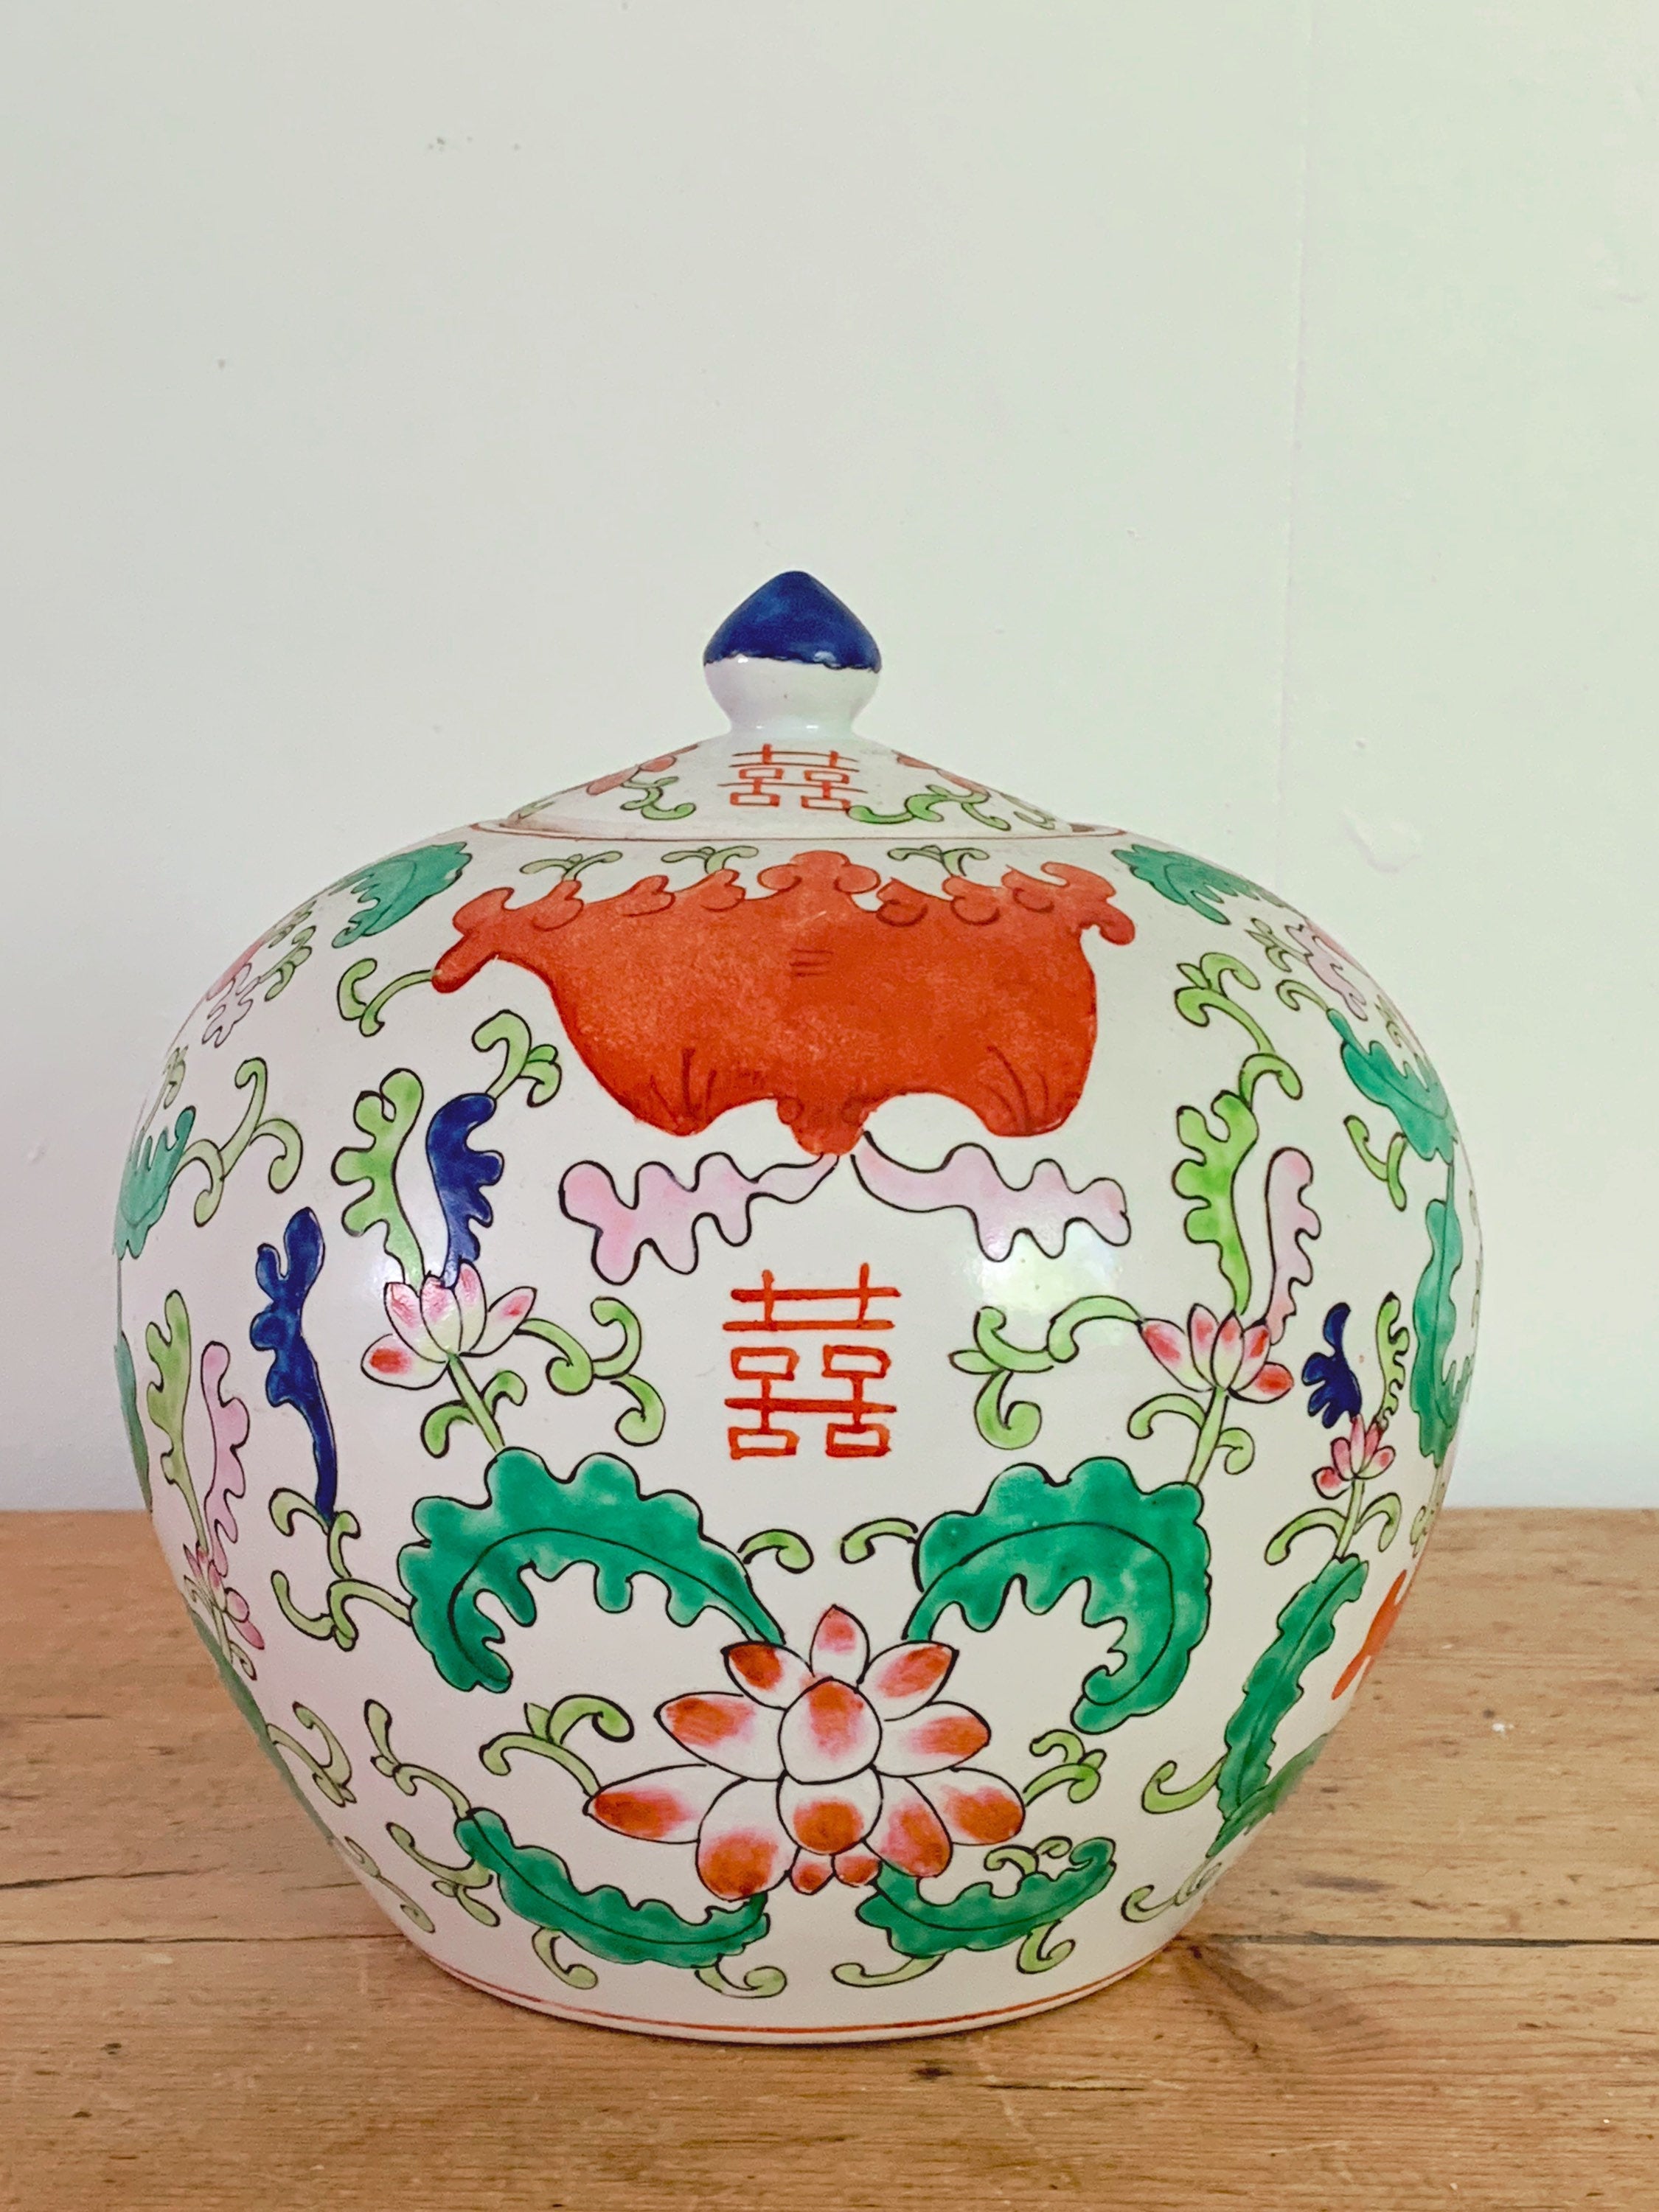 Vintage Hand-Painted Chinese Double Happiness Melon Jar in Red and Green | Large Chinoiserie Ginger Jar | Porcelain Flower Vase Wedding Gift